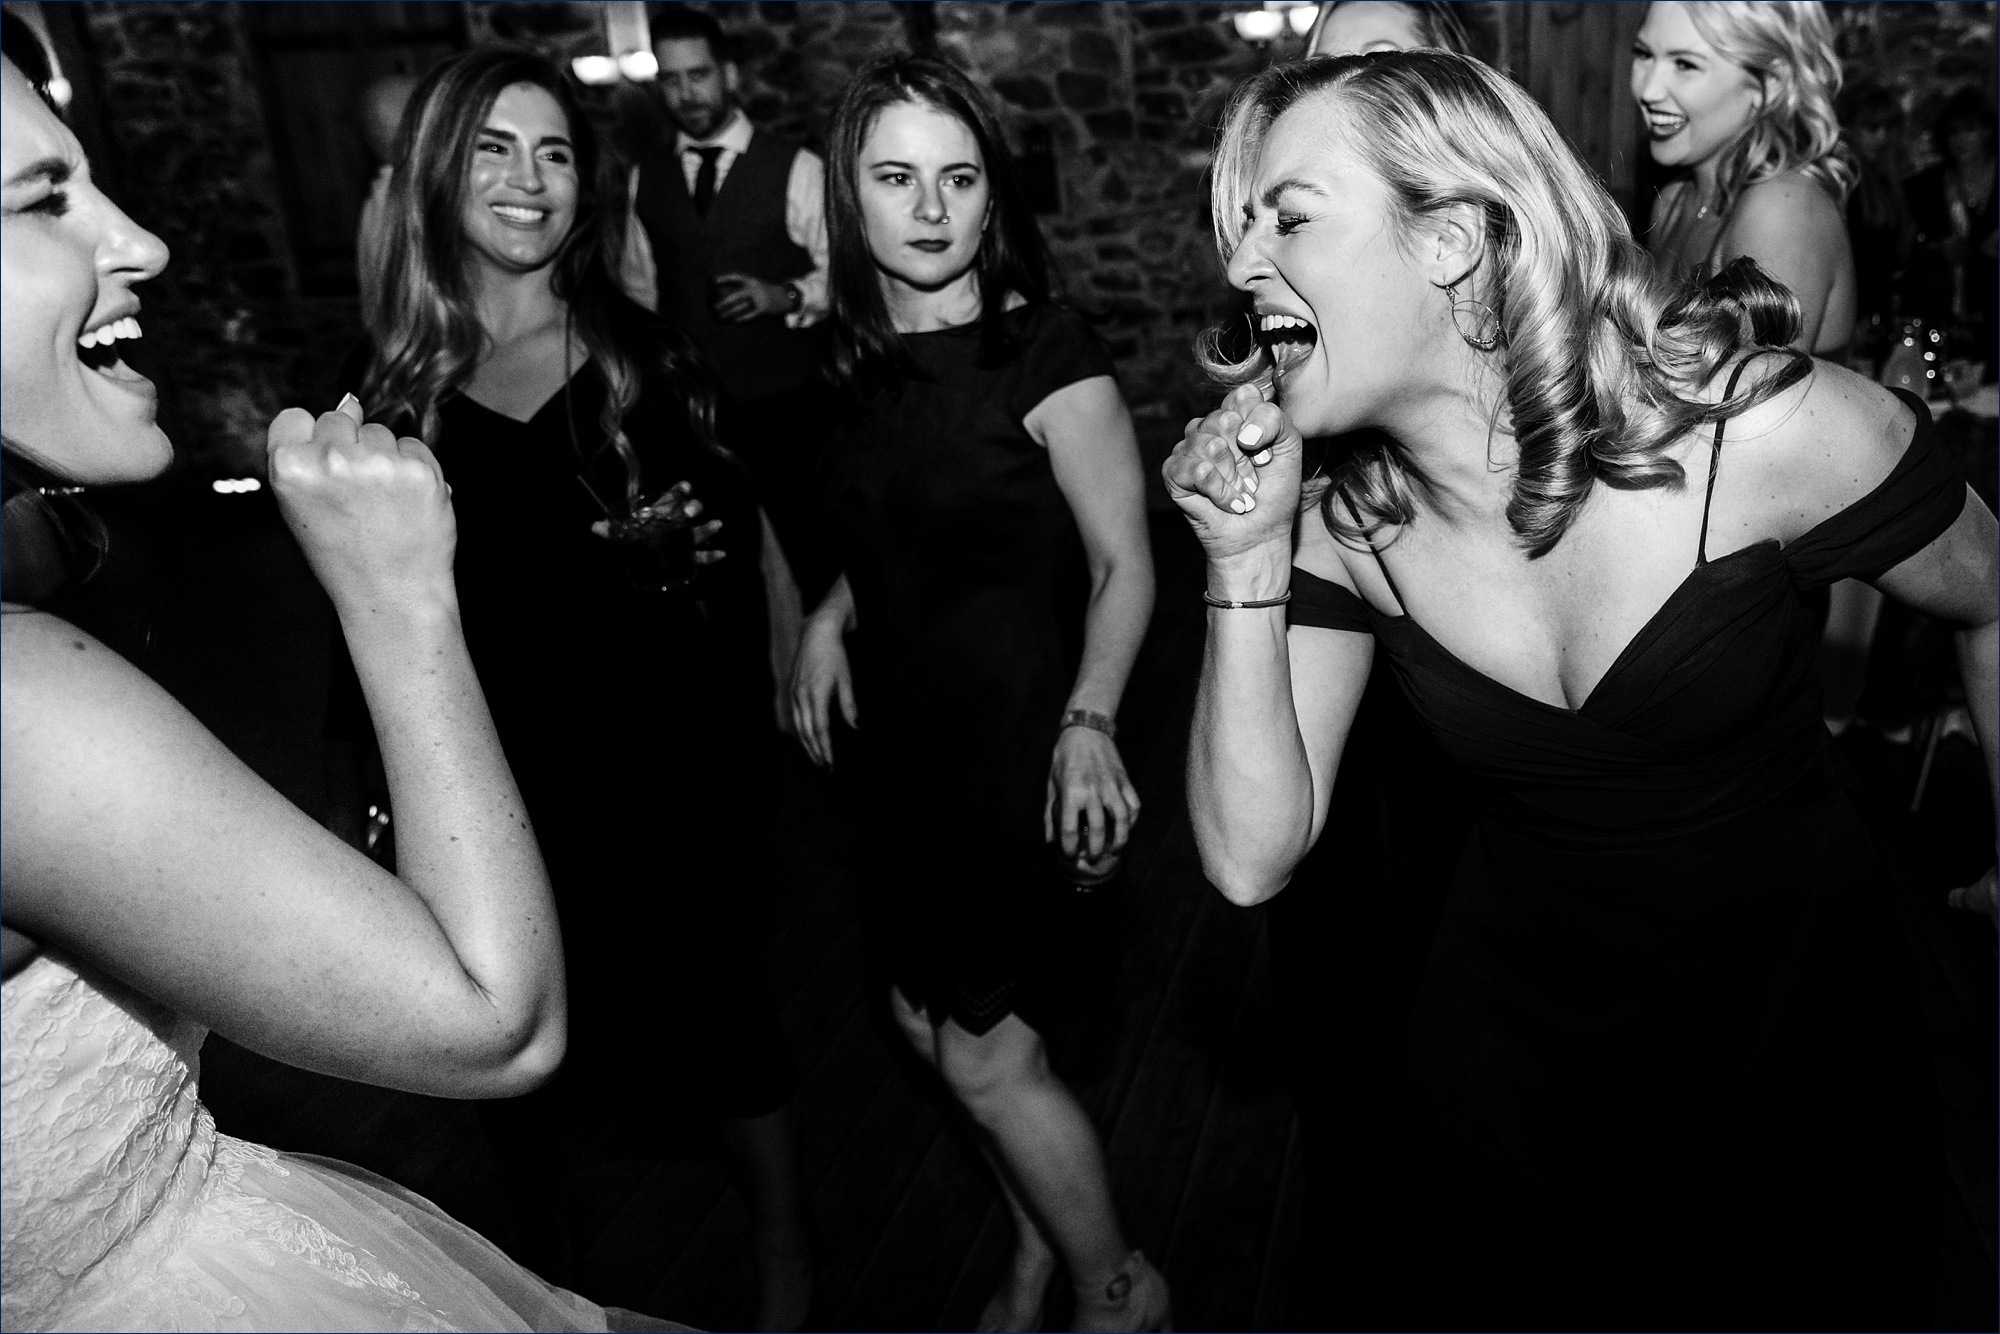 A sing off from the bride and her bridesmaid on the dance floor